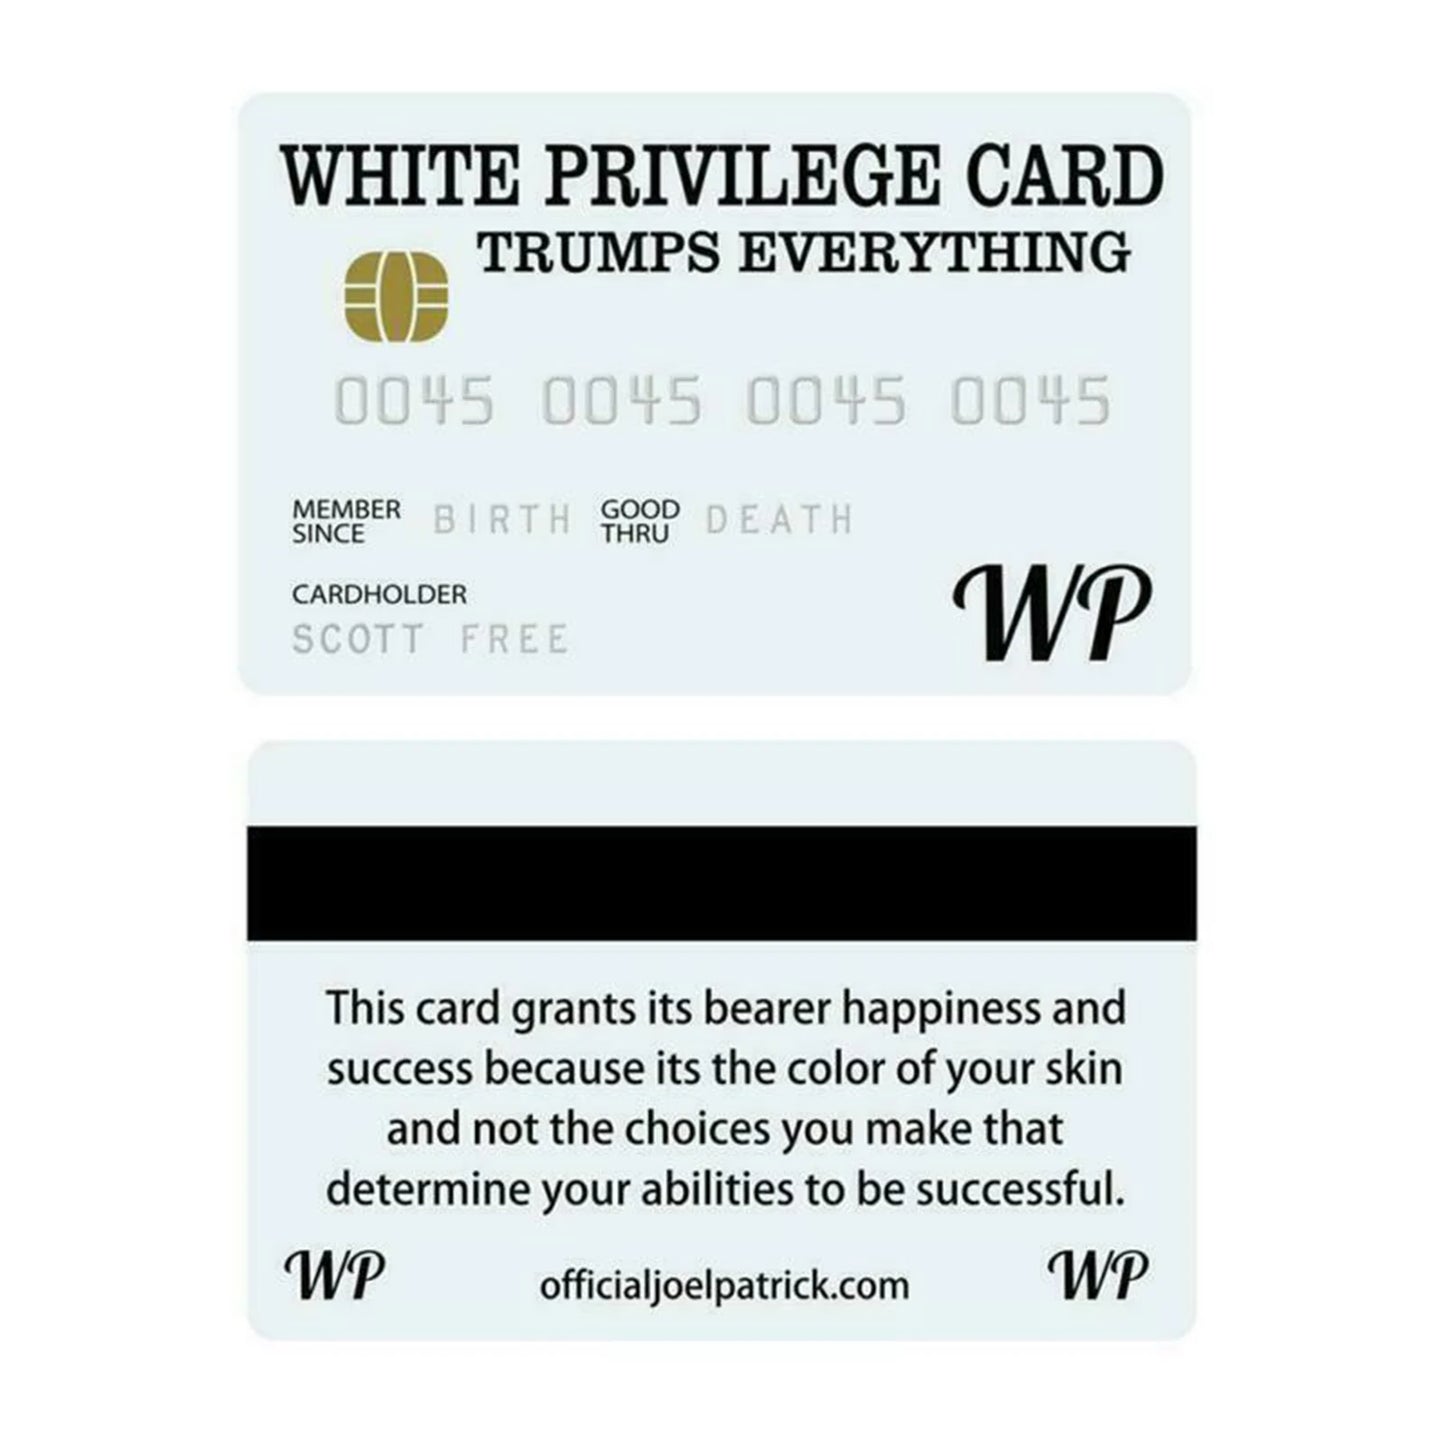 White Privilege Card Official Race Card Trumps Jokes Men And Women Give Gifts To Each Other birthday Inspirational Card Gift